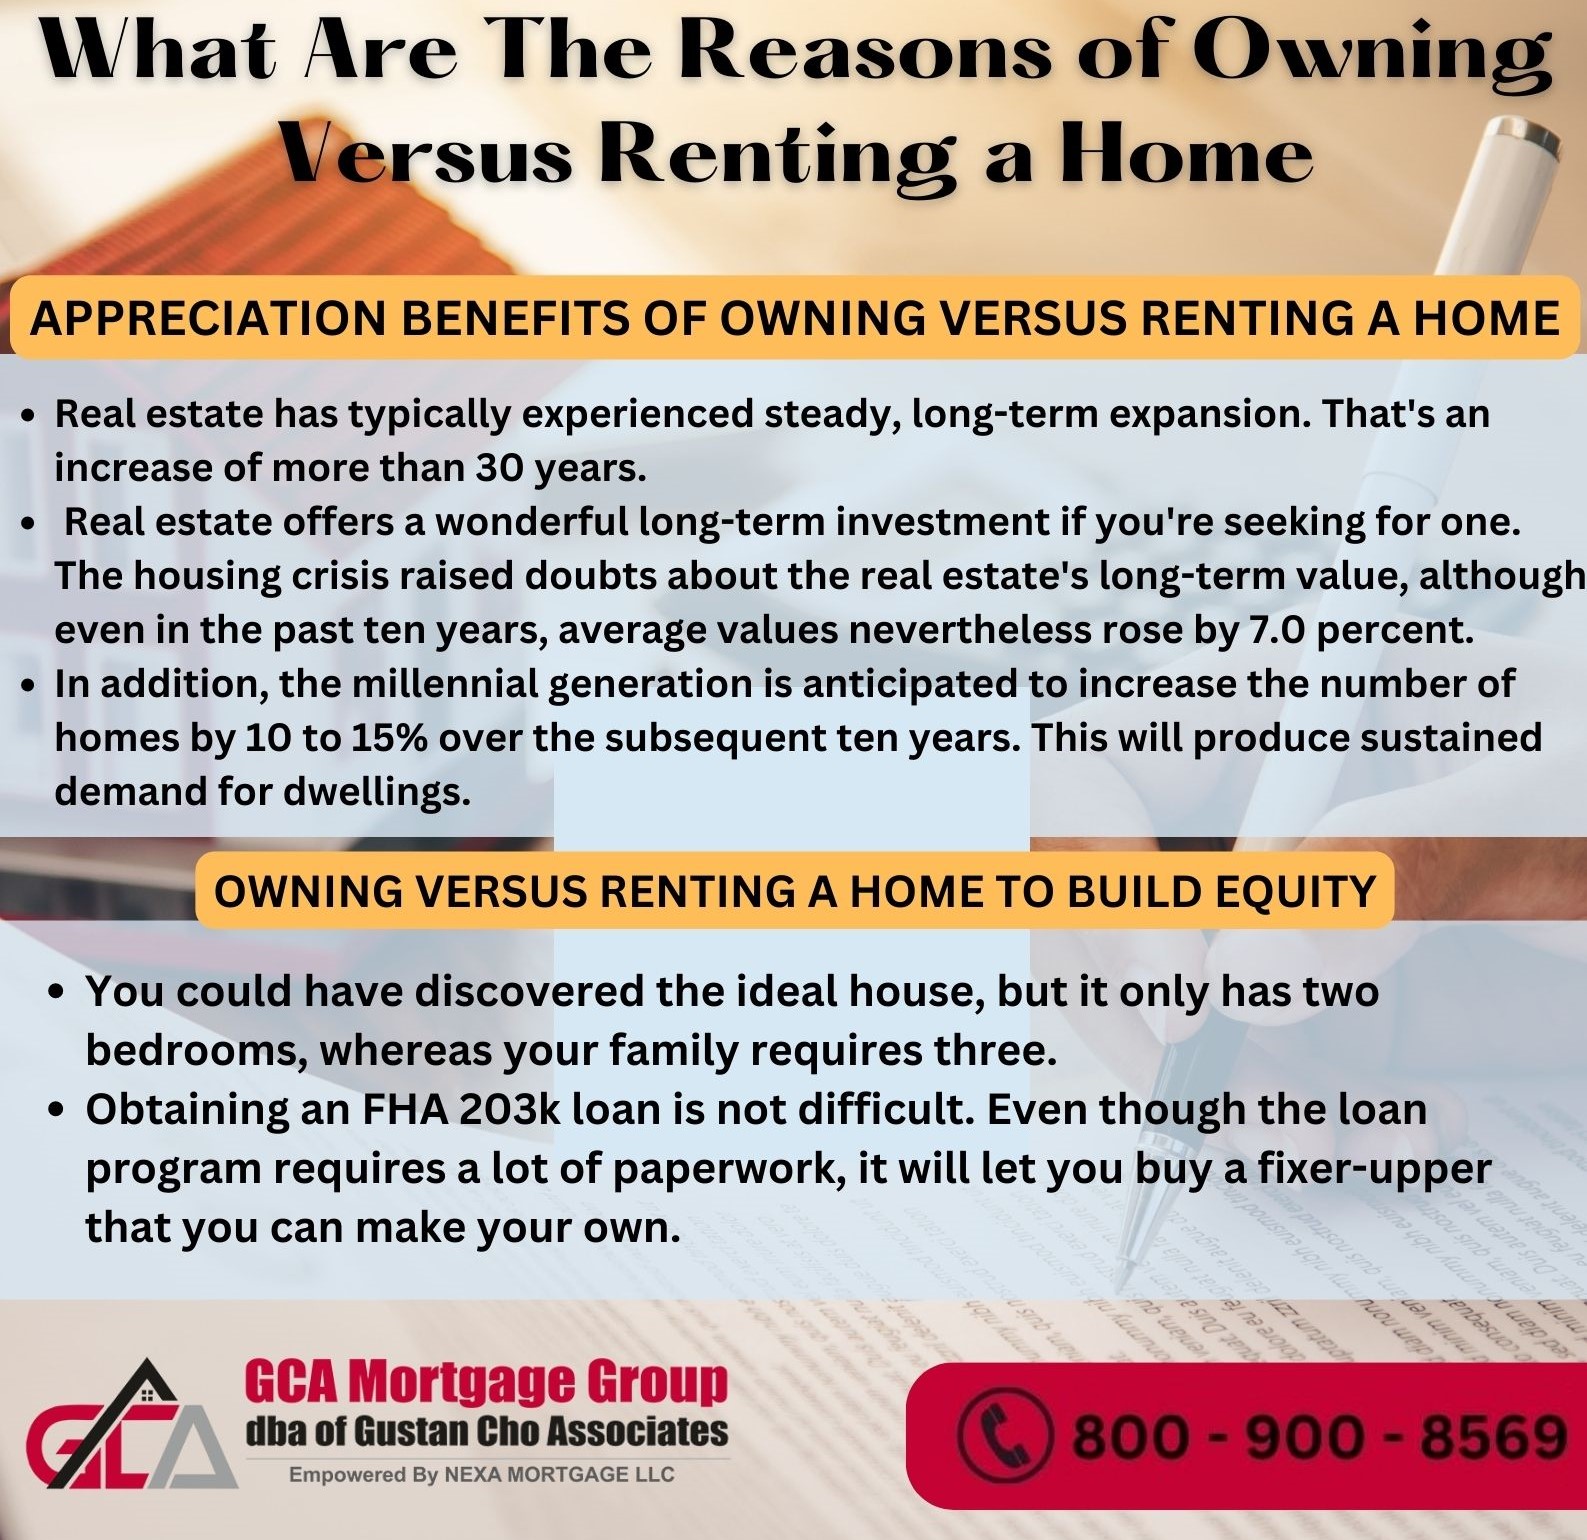 The Benefits of Tax Benefits For Owning Versus Renting a Home